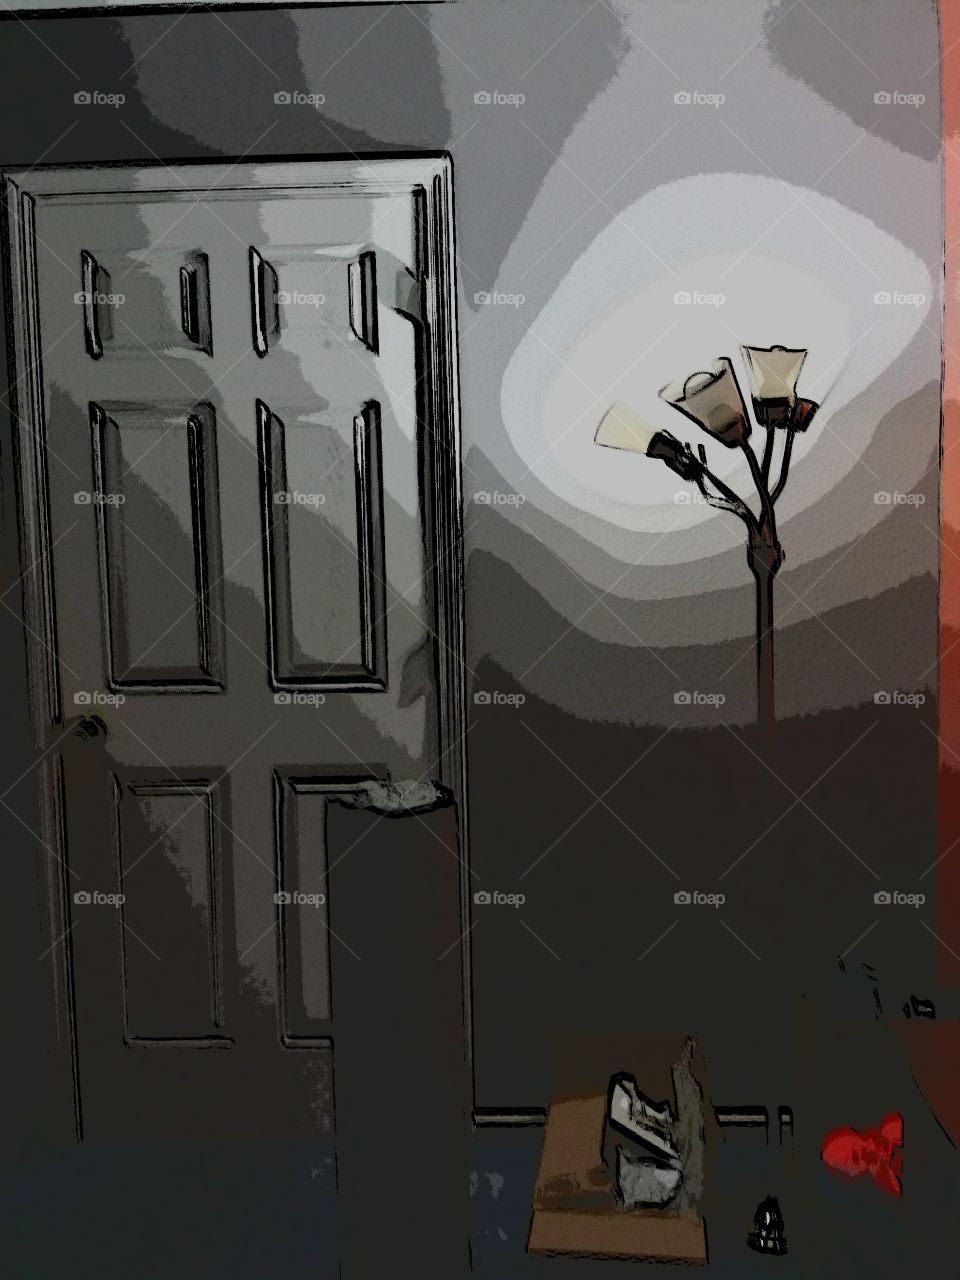 animated light and door